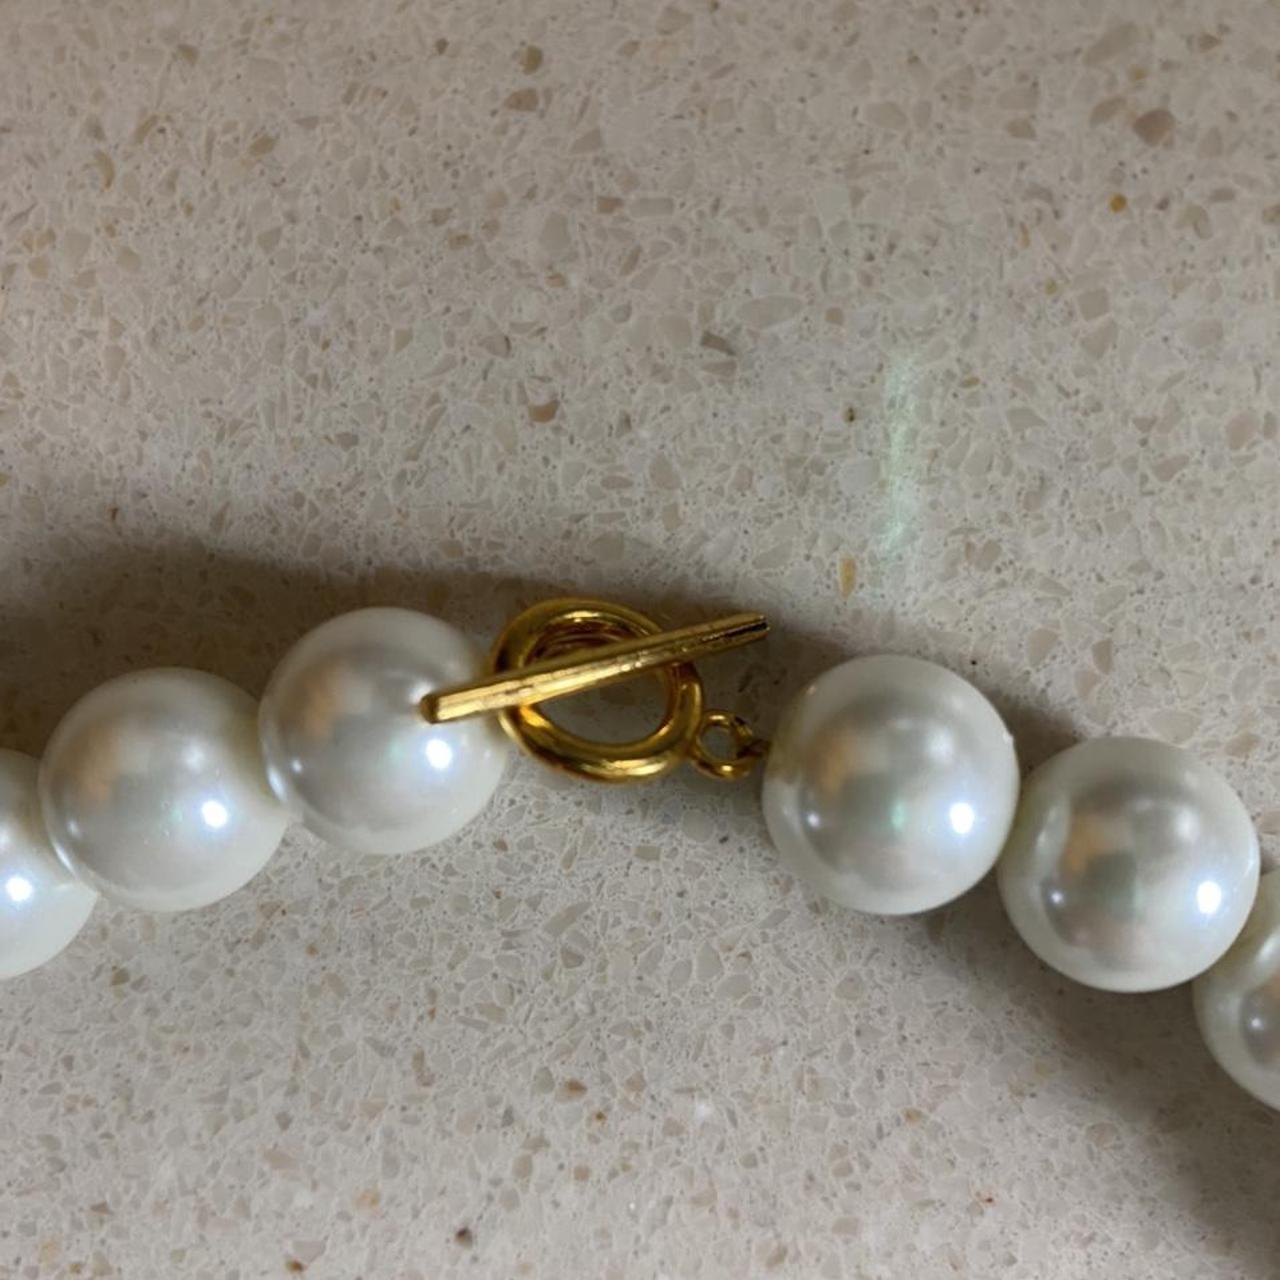 Women's Gold and White Jewellery (3)